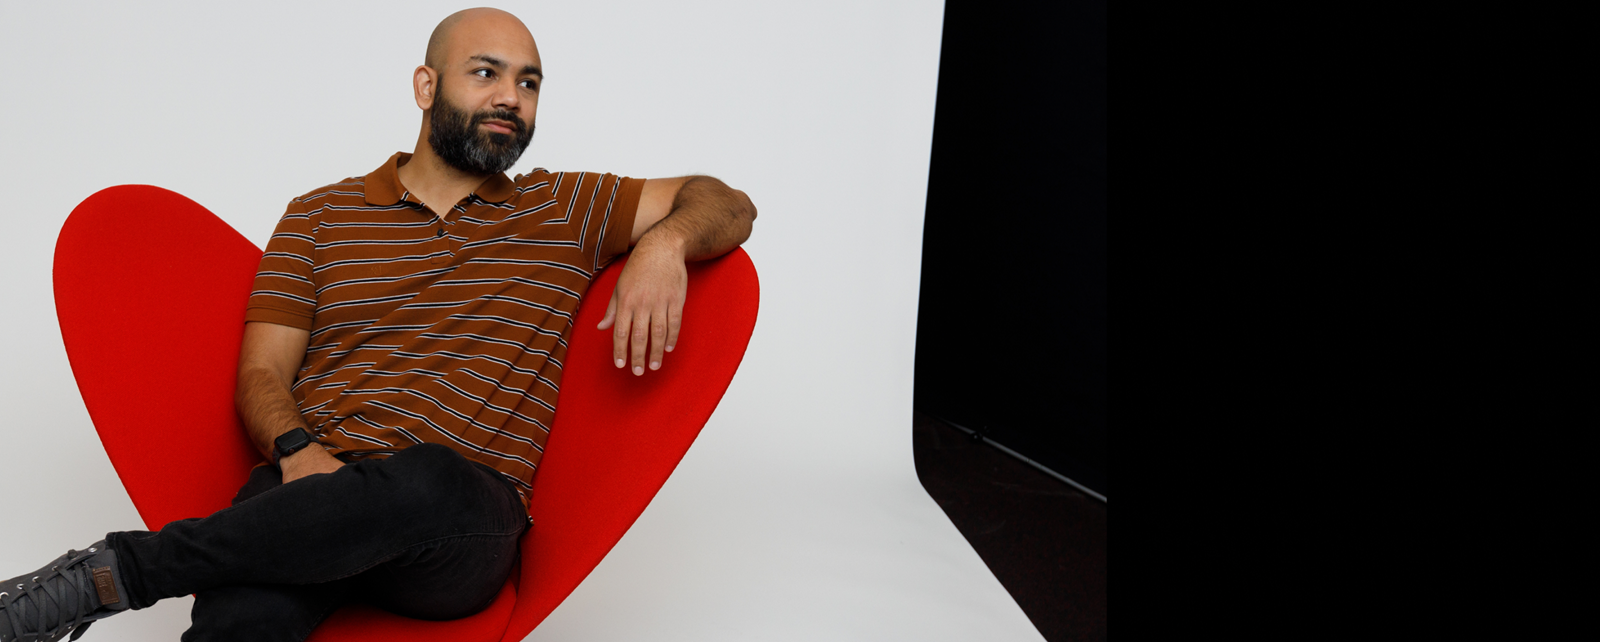 Man With Beard Posing On A Red Chair